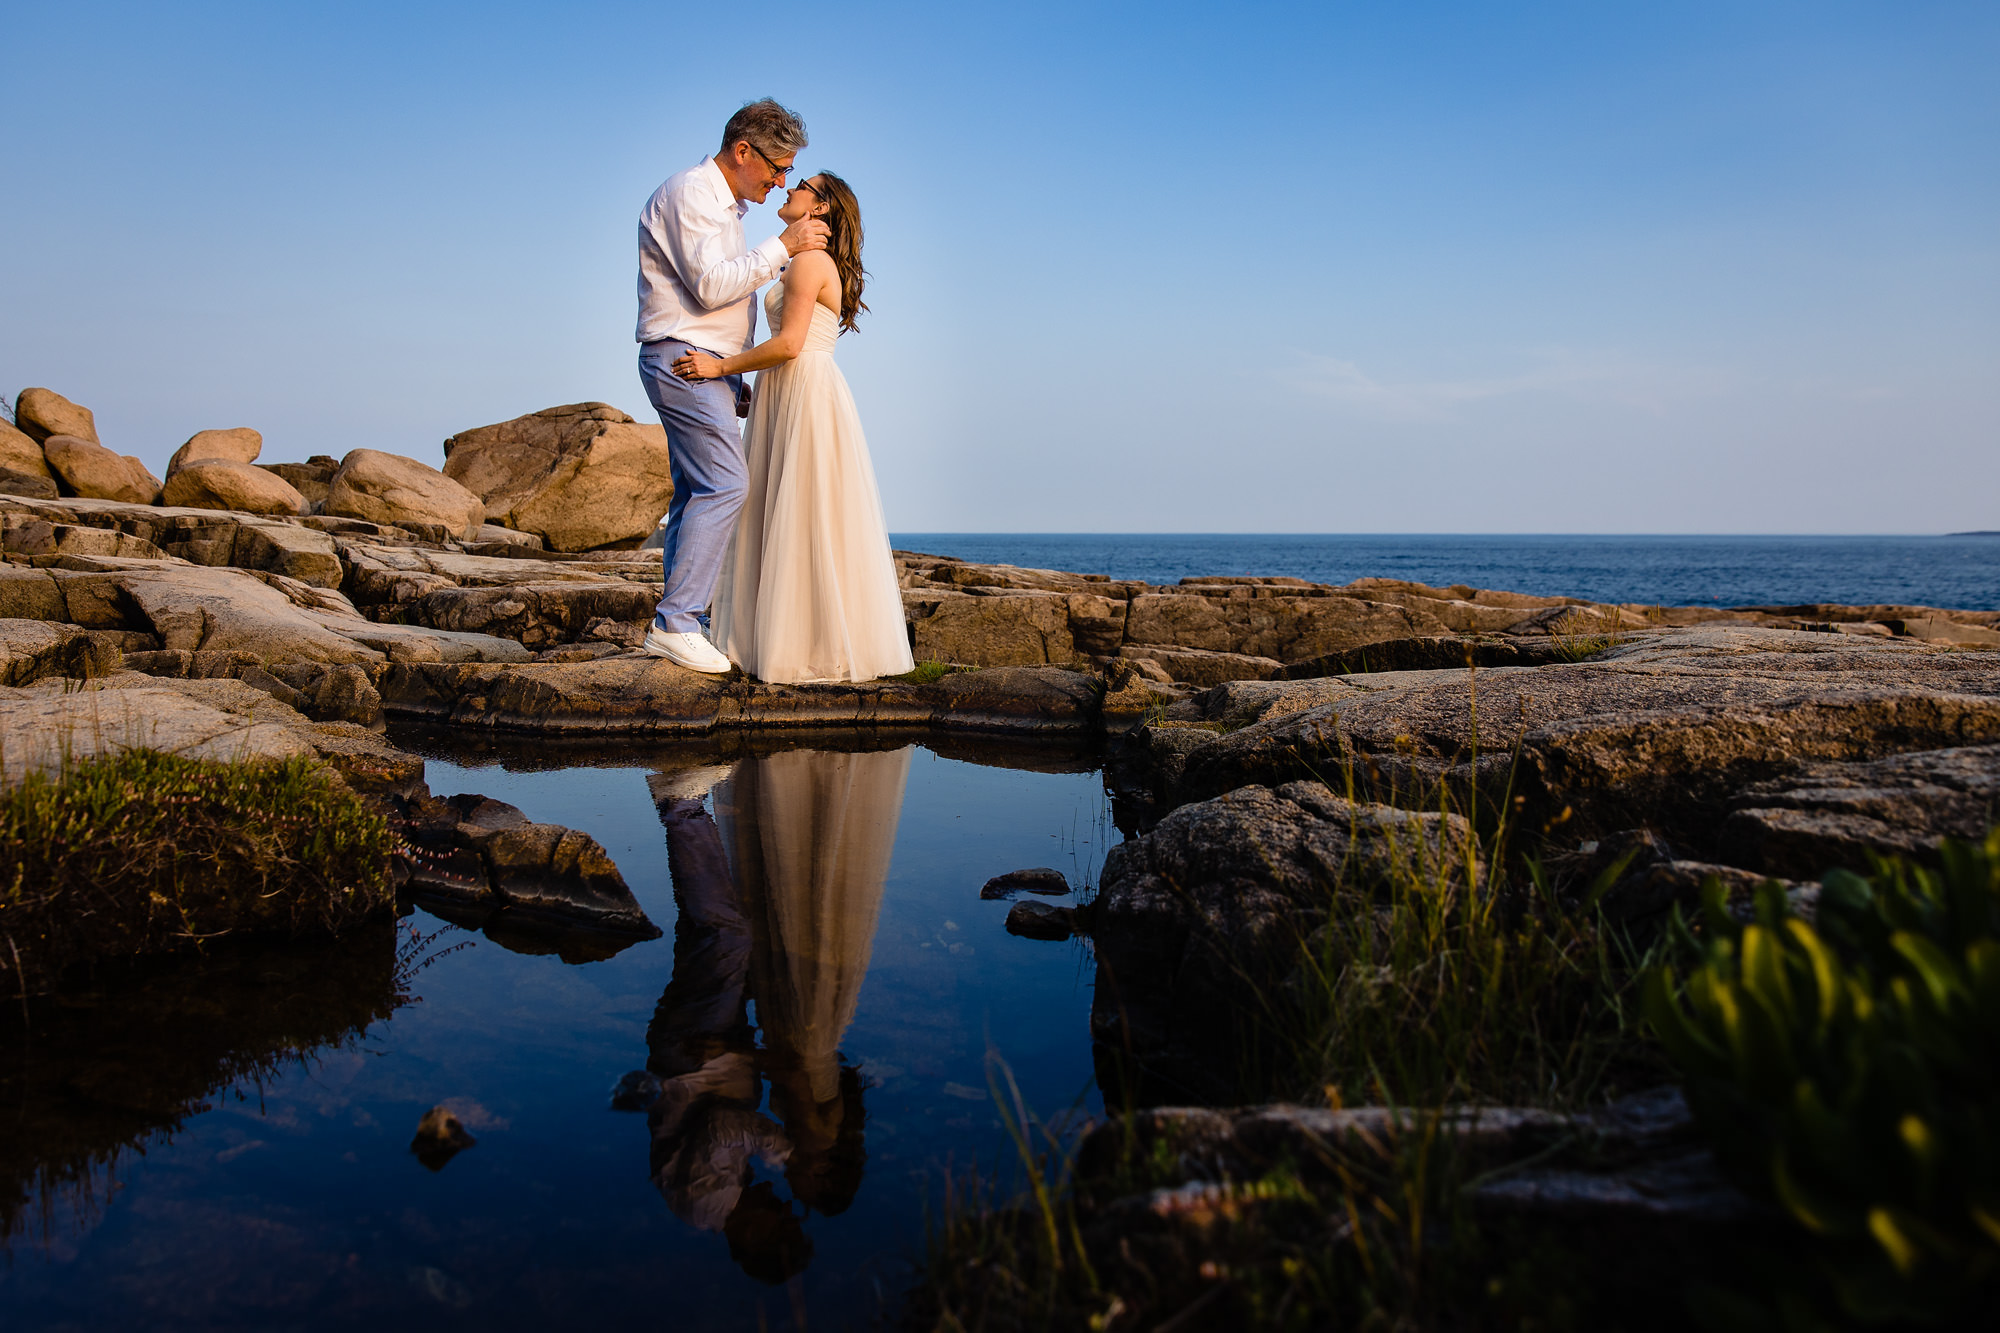 A unique reflection portrait in a tidal pool for an Acadia elopement couple